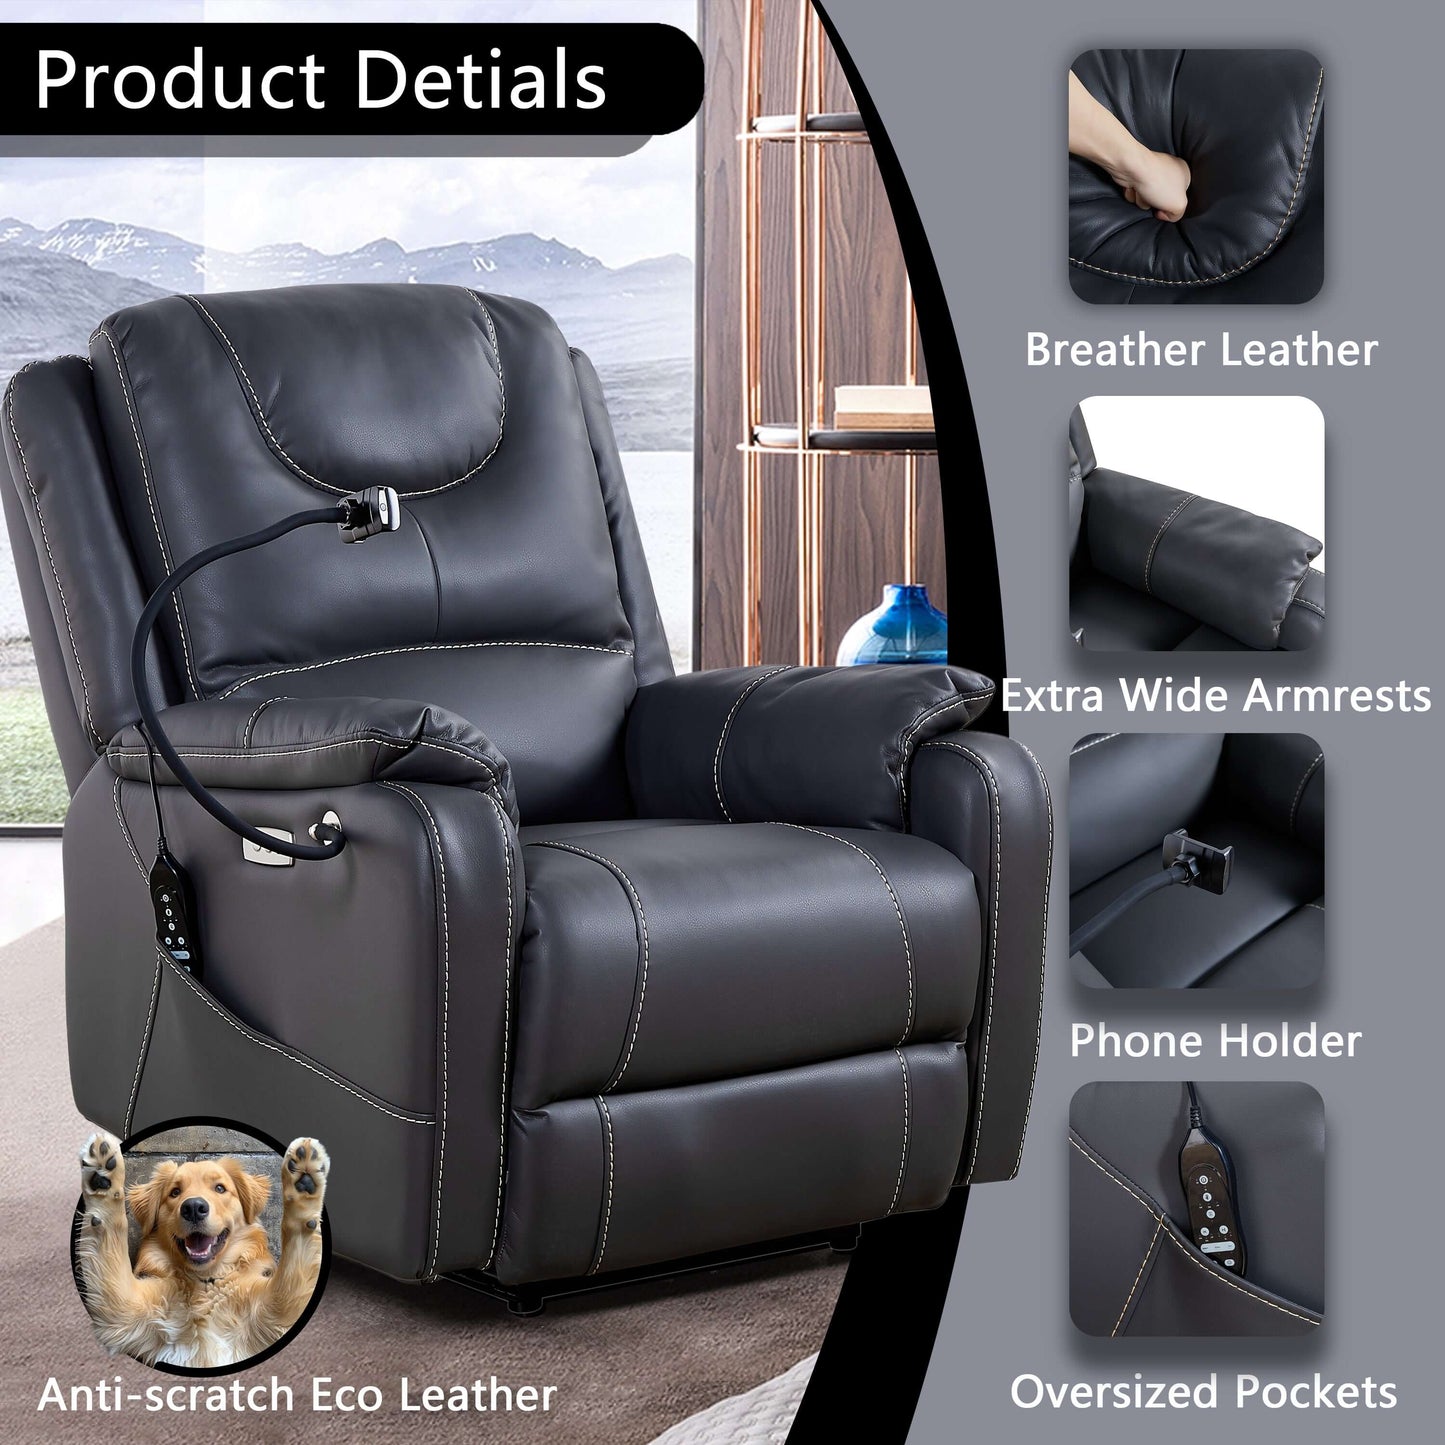 Power Zero Gravity Chair: Electric Recliner with Heat and Massage, Side Pockets,USB Port - Scratch Resistant Eco Leather Black